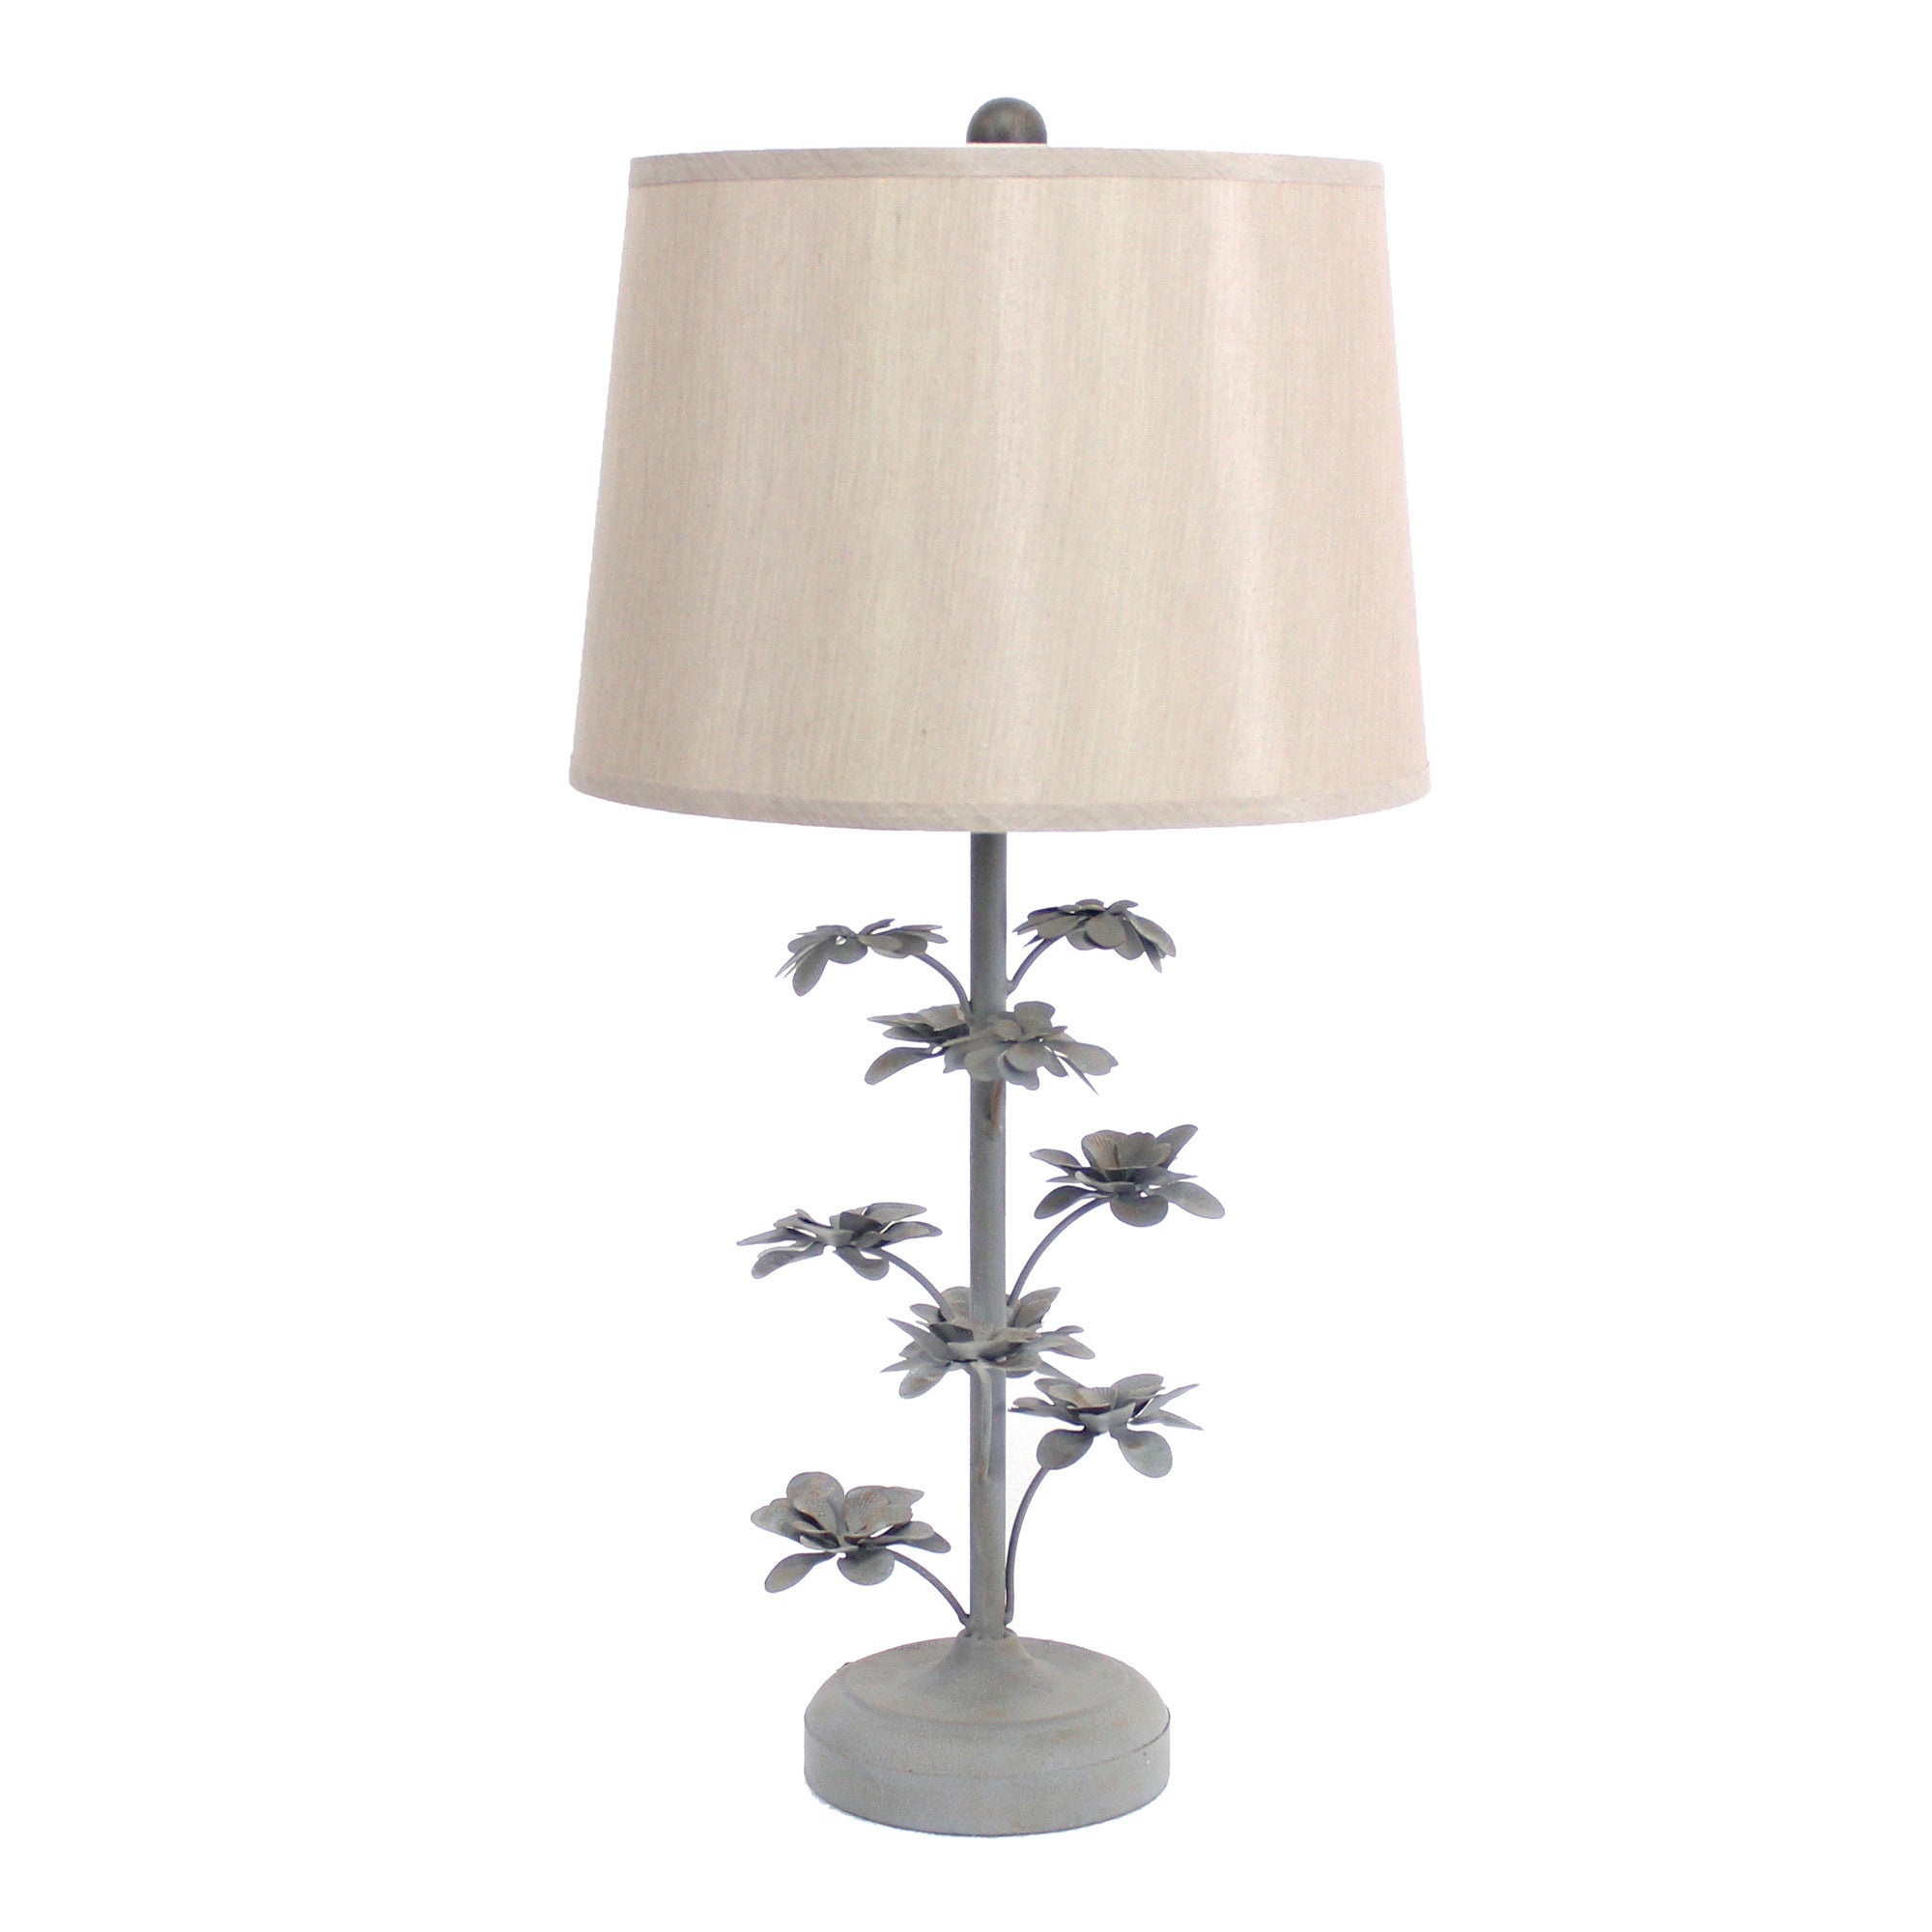 8 X 12 X 28 Gray Rustic Flowering Tree - Table Lamp - Tuesday Morning-Table Lamps